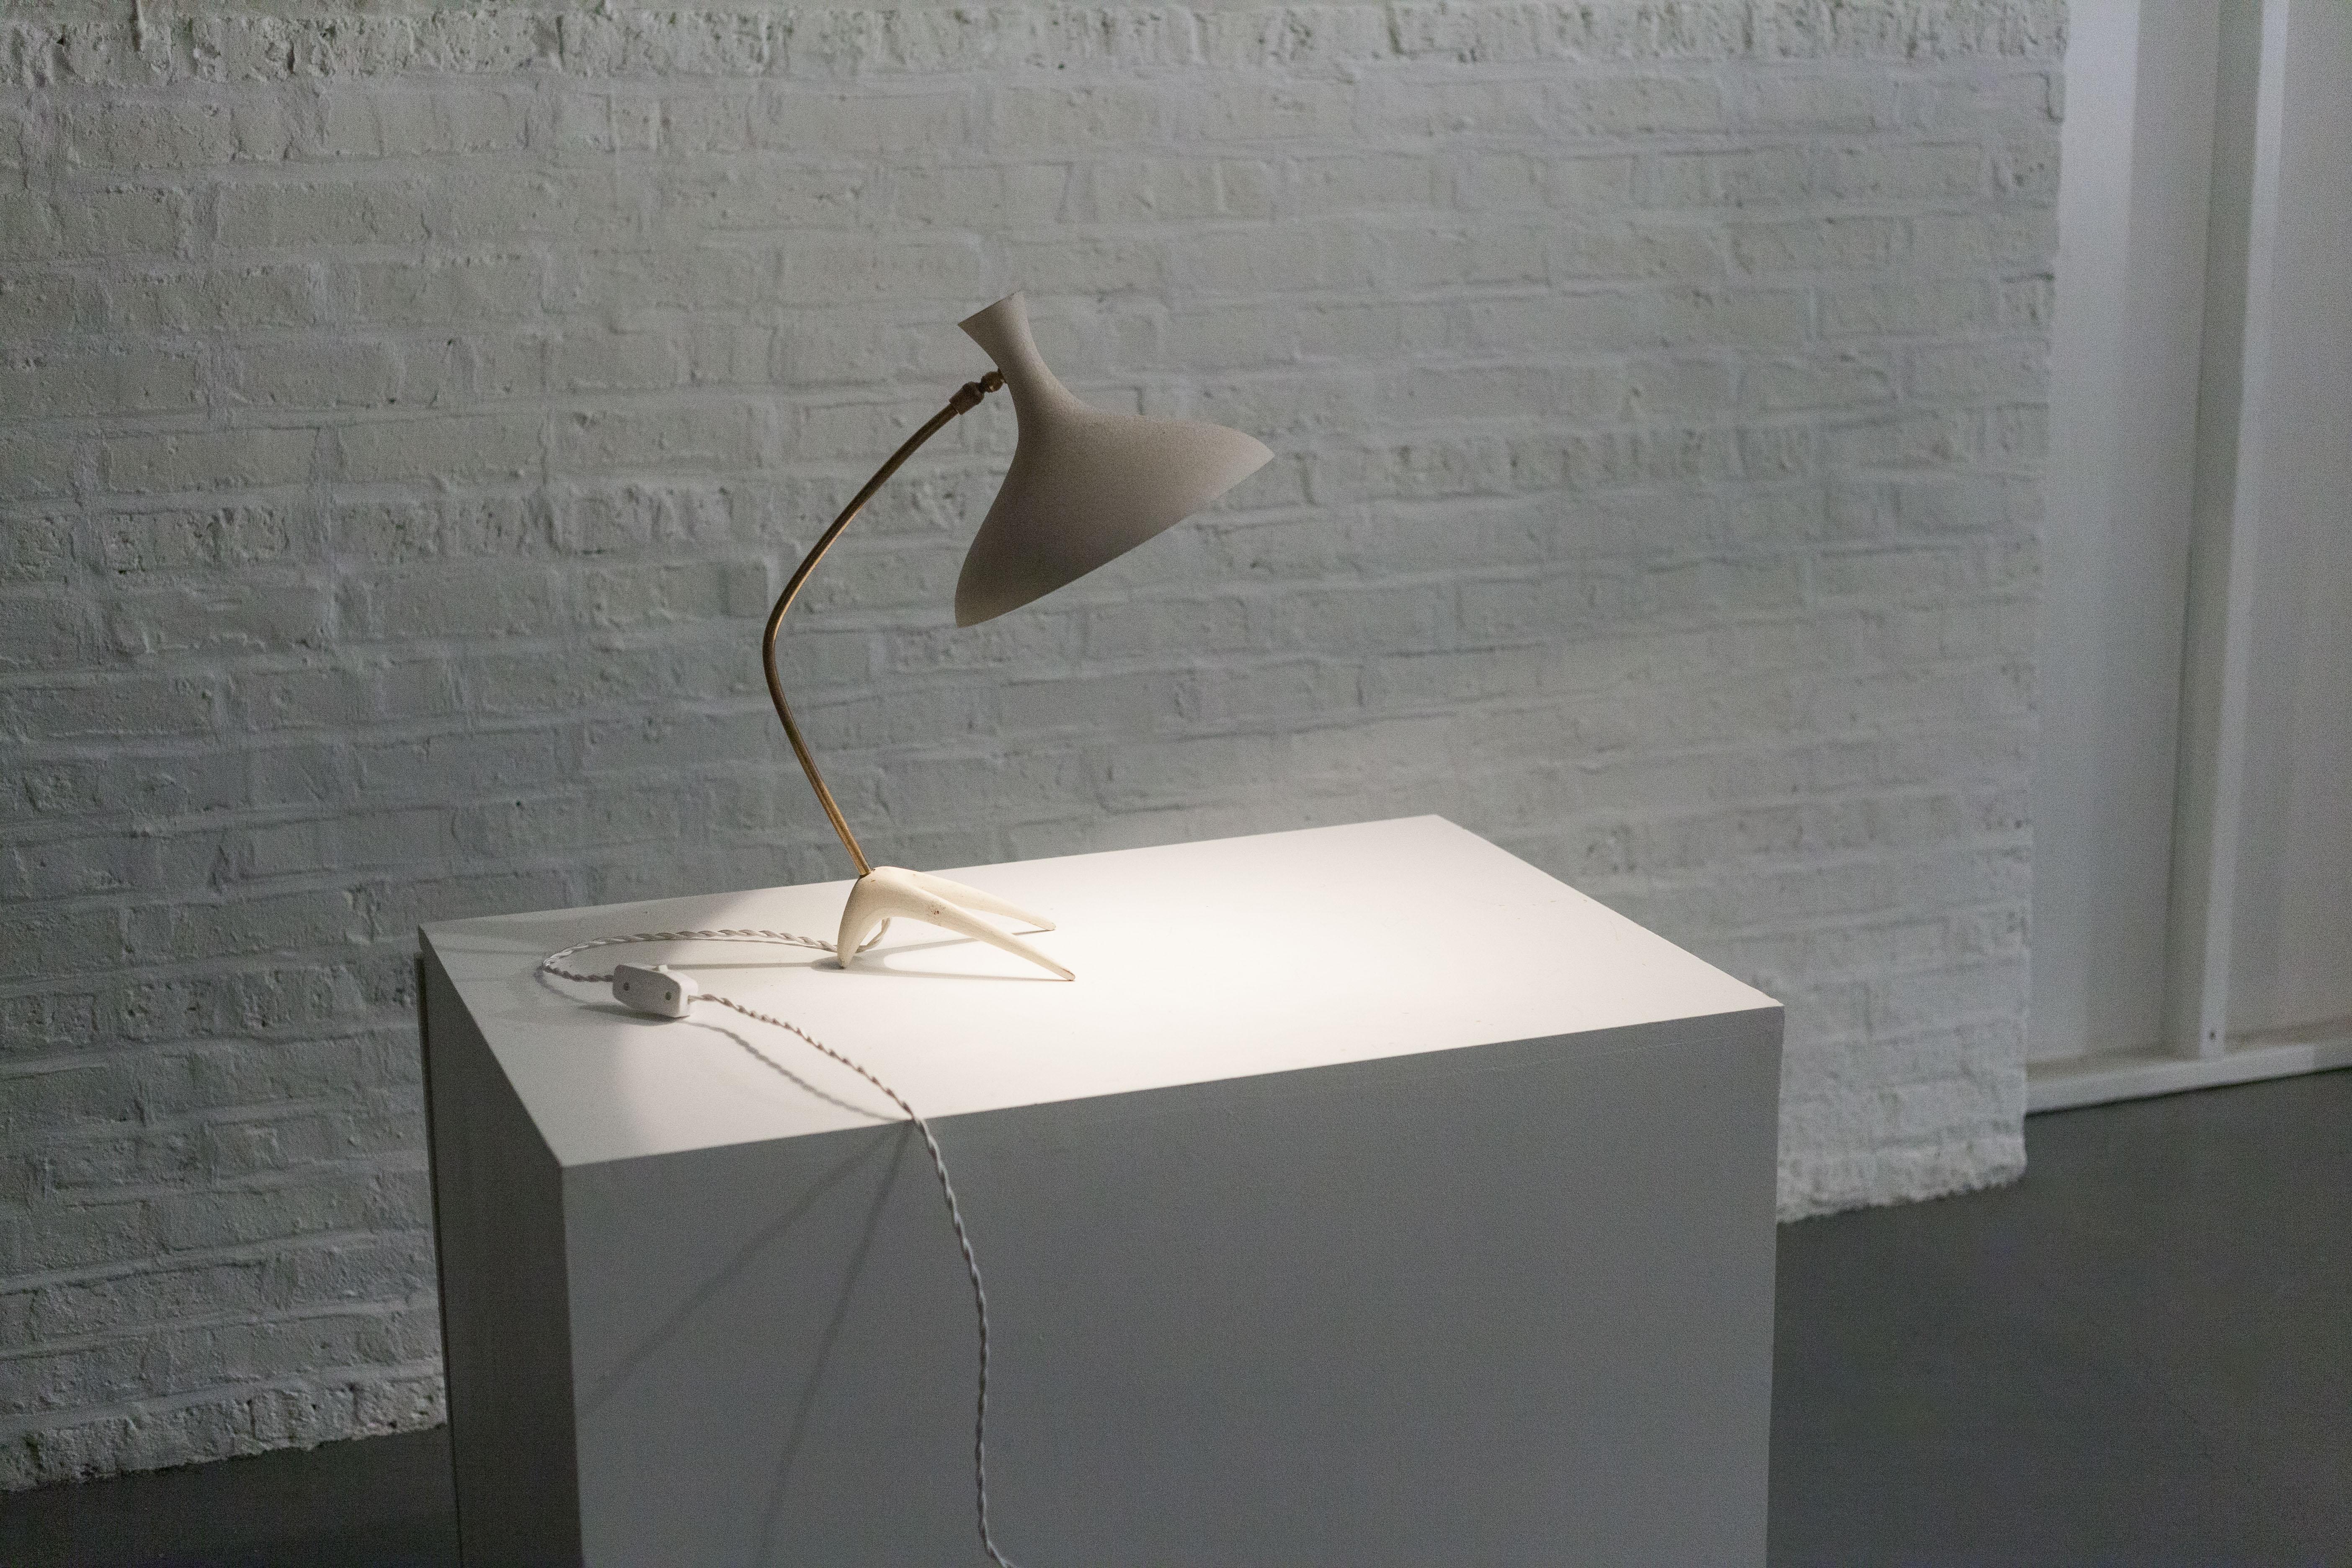 Table Lamp by Cosack Leuchten, White, Germany, 1950s For Sale 10